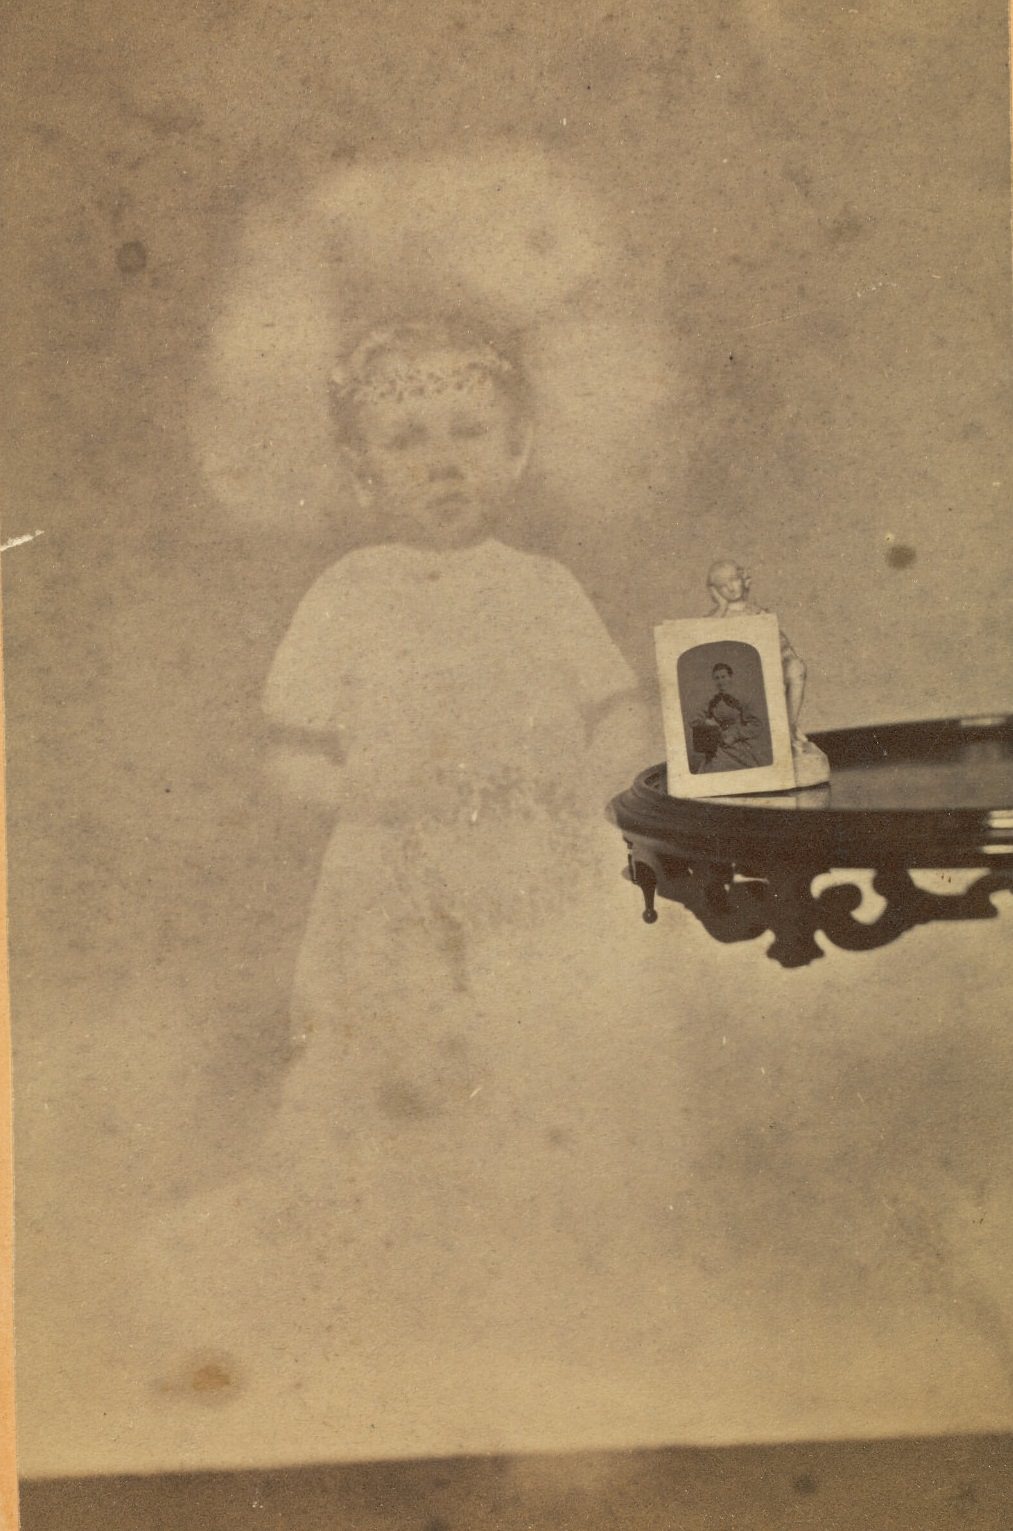 Small statuette and photograph on a side table, with the faint image of a young boy floating next to it.